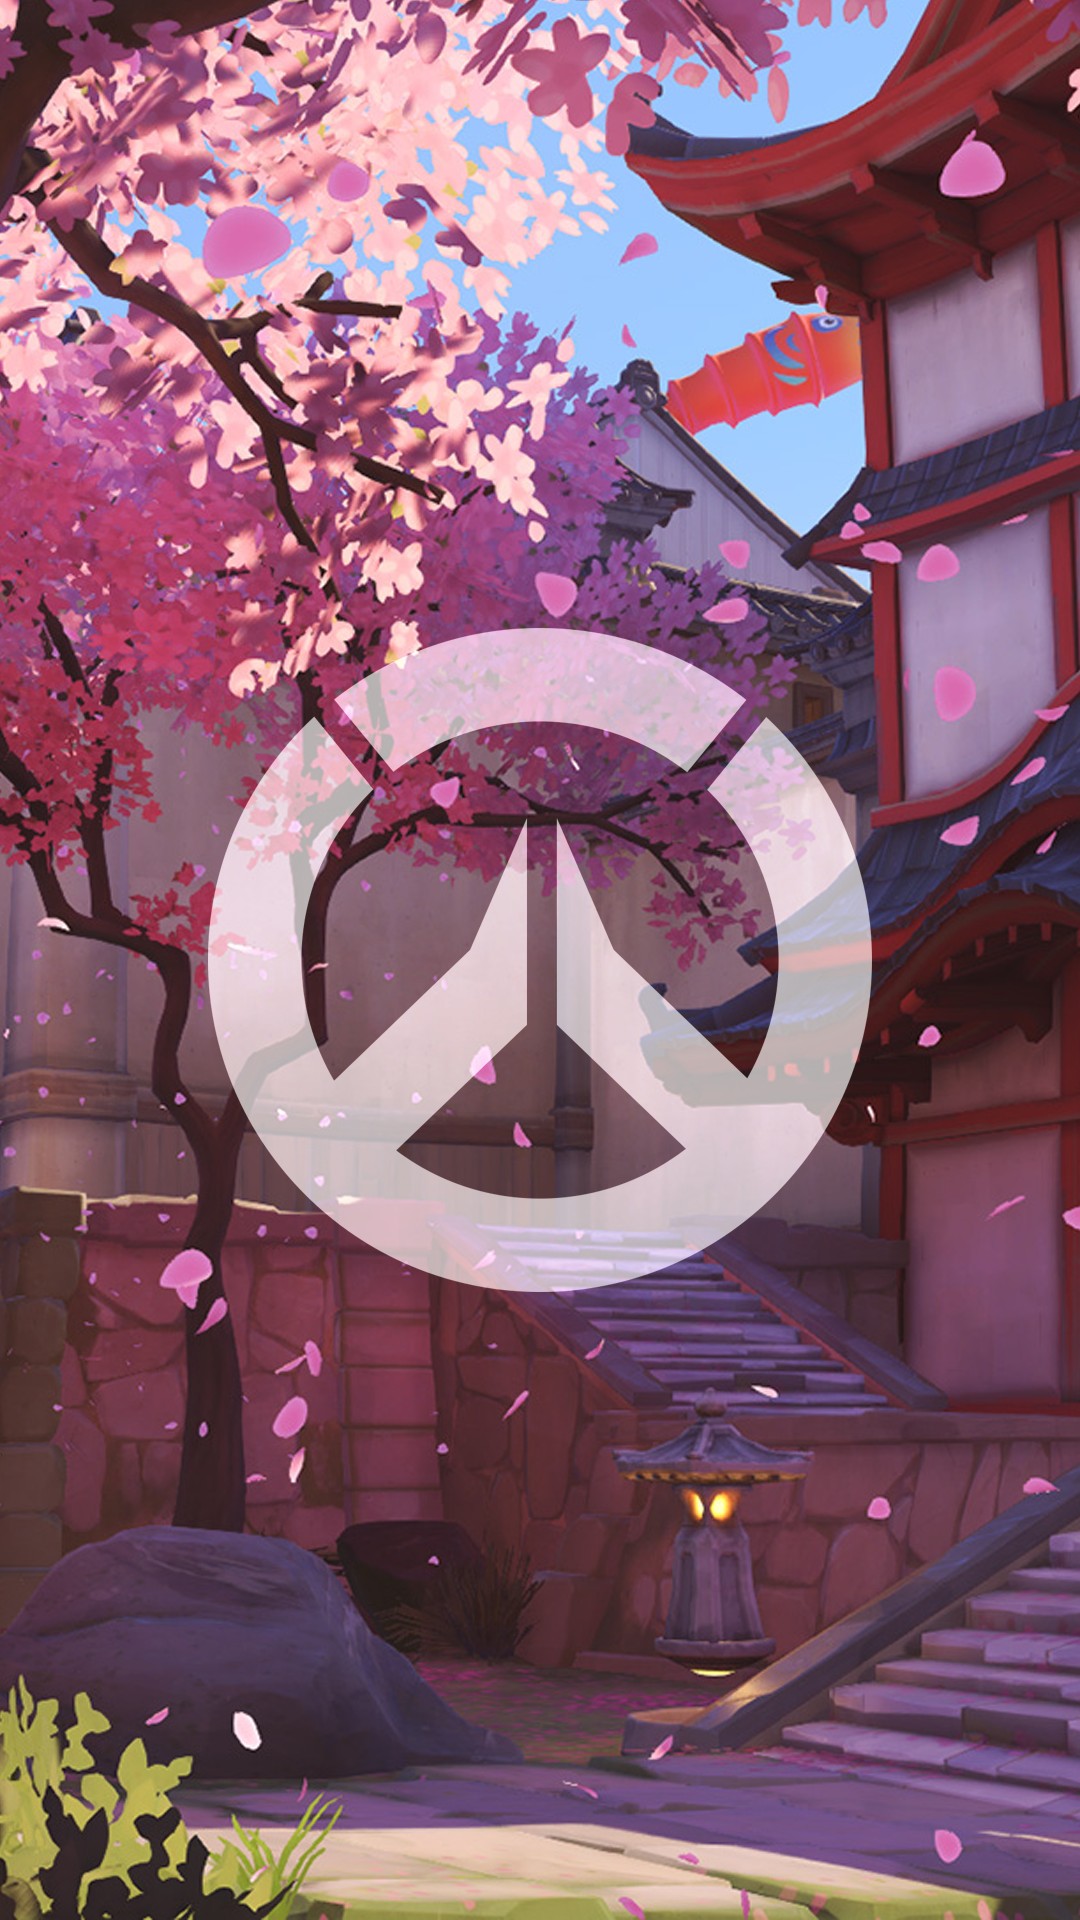 Overwatch mobile wallpaper ·① Download free stunning full ...